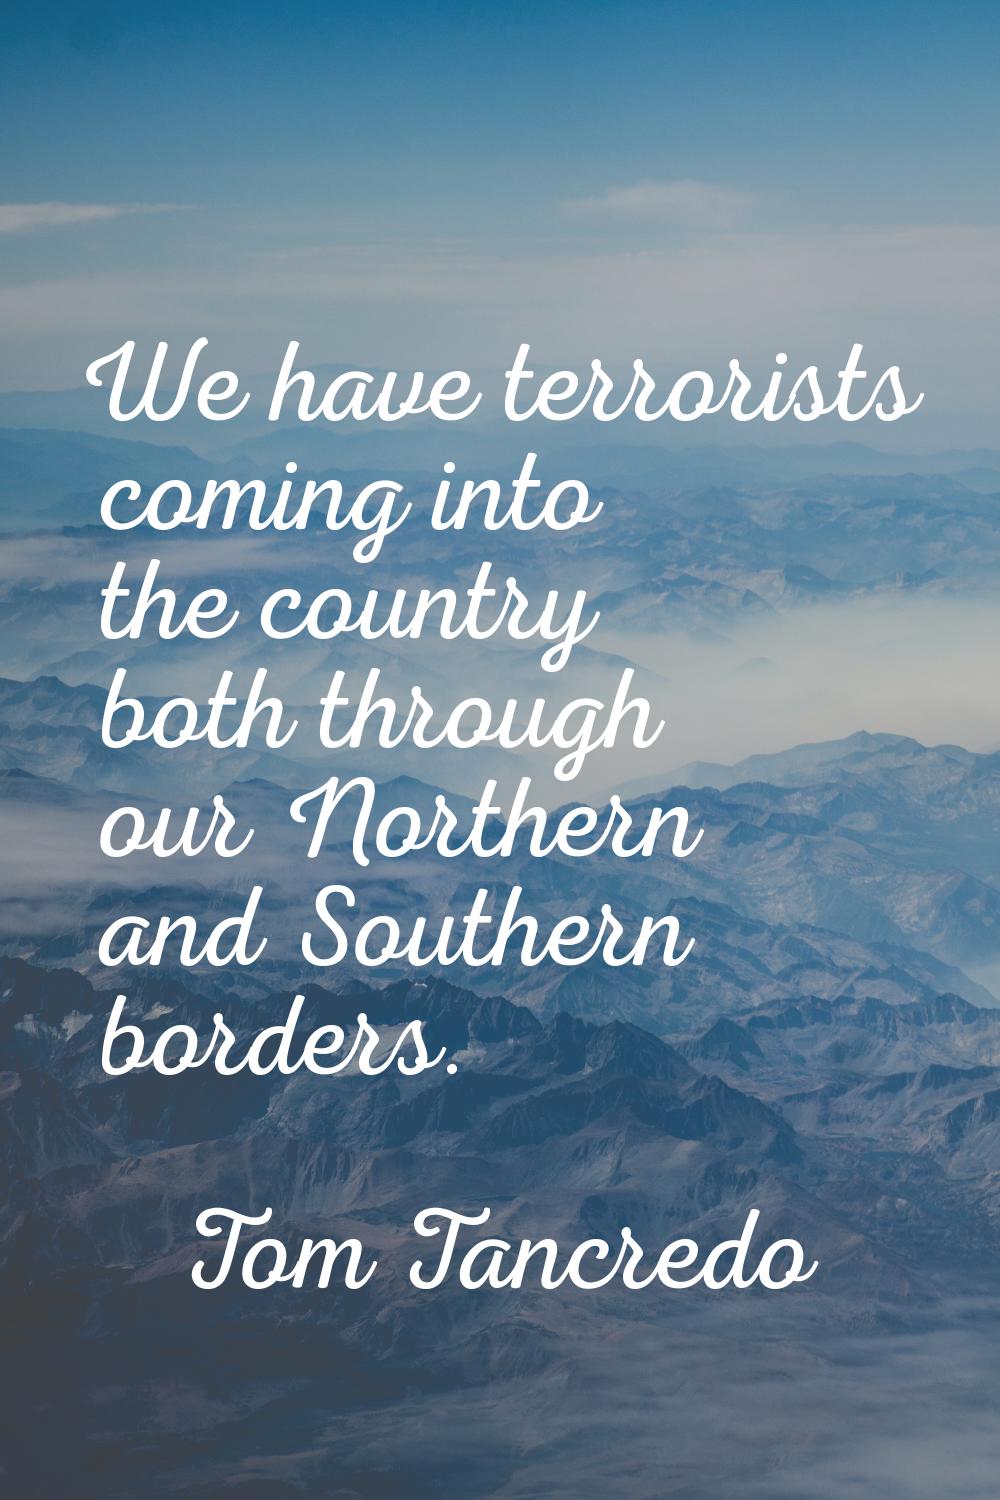 We have terrorists coming into the country both through our Northern and Southern borders.